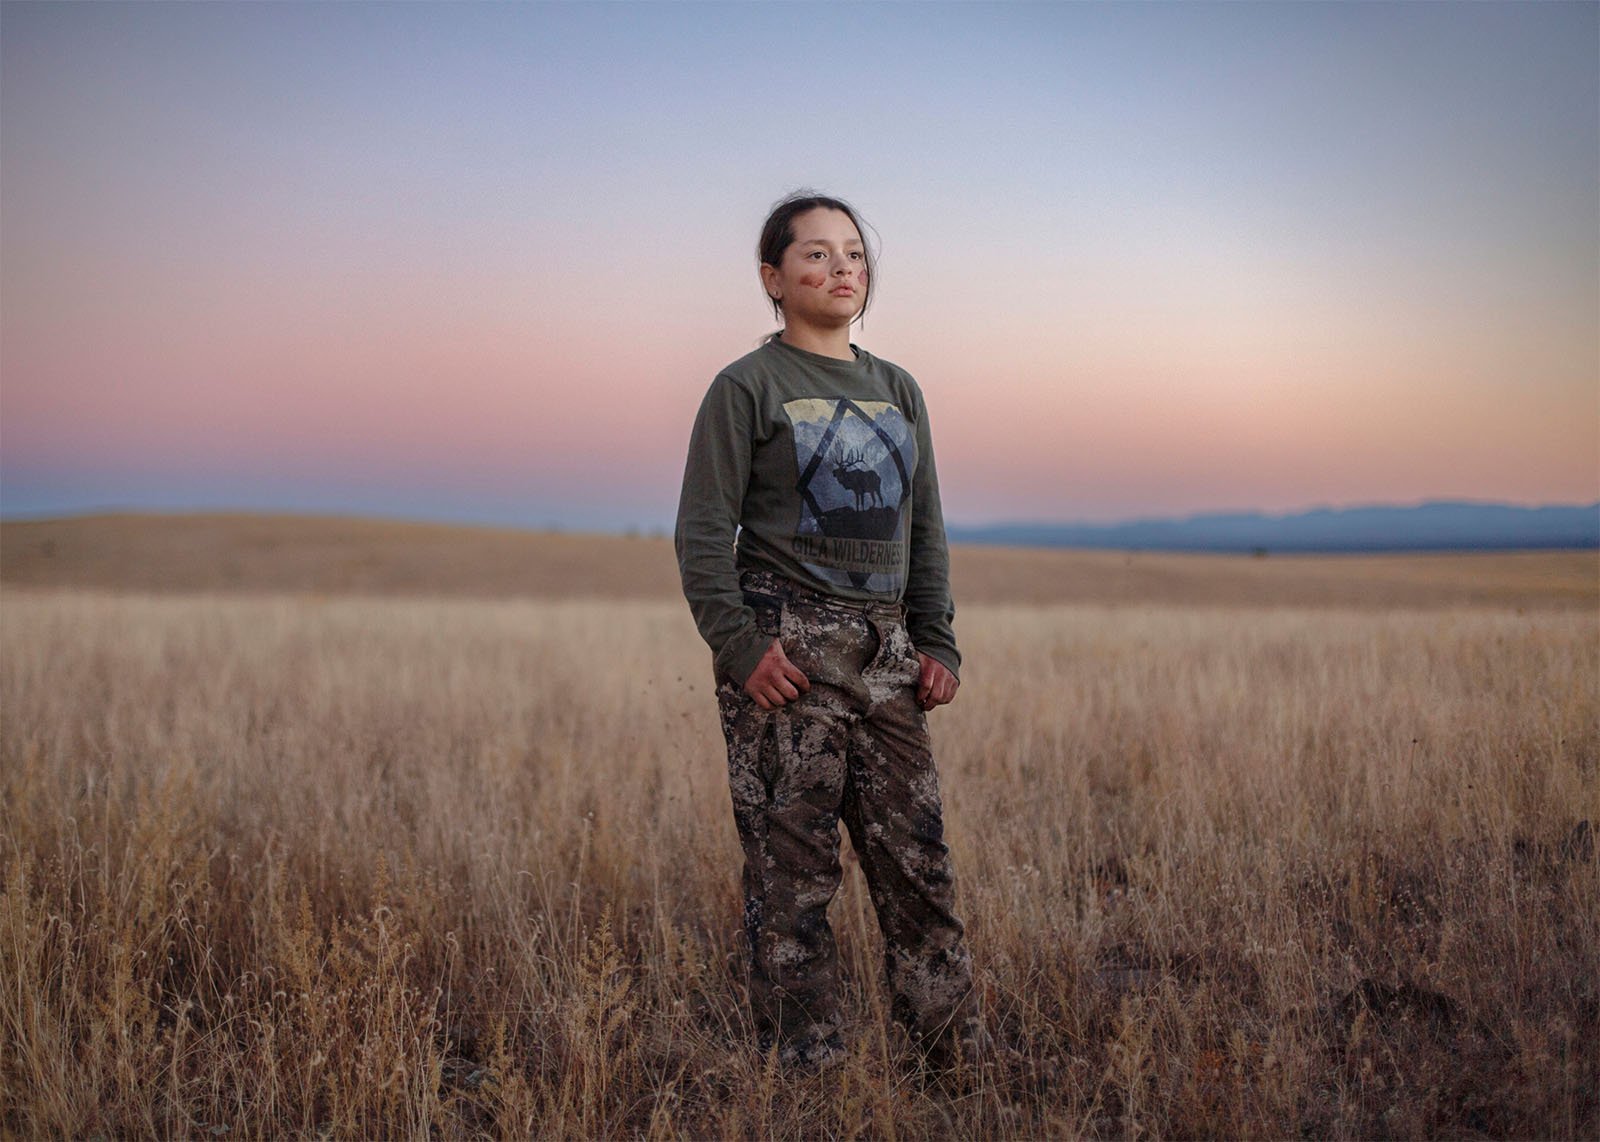 A young woman stands in a field at twilight, wearing camouflage pants and a green shirt with a skull design, looking confidently at the camera with a serene sky behind her.